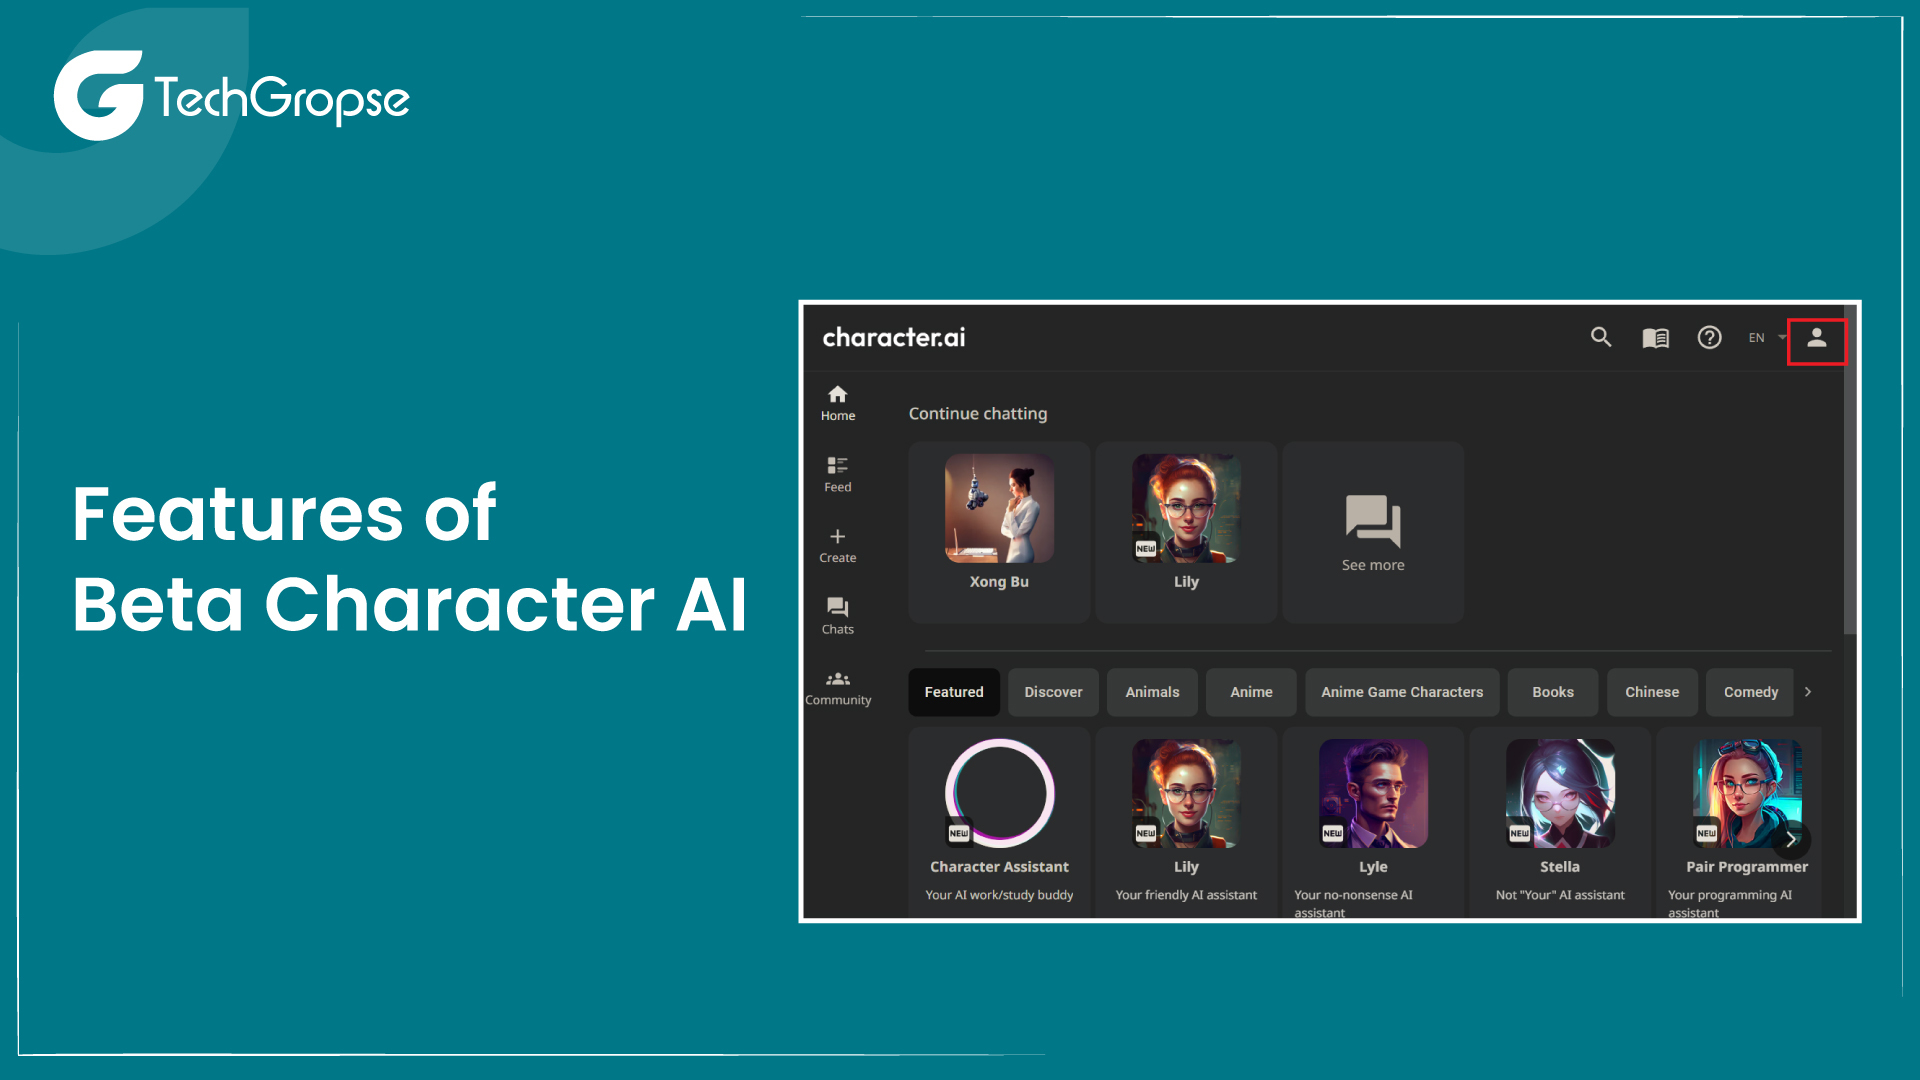 Features of Beta Character AI